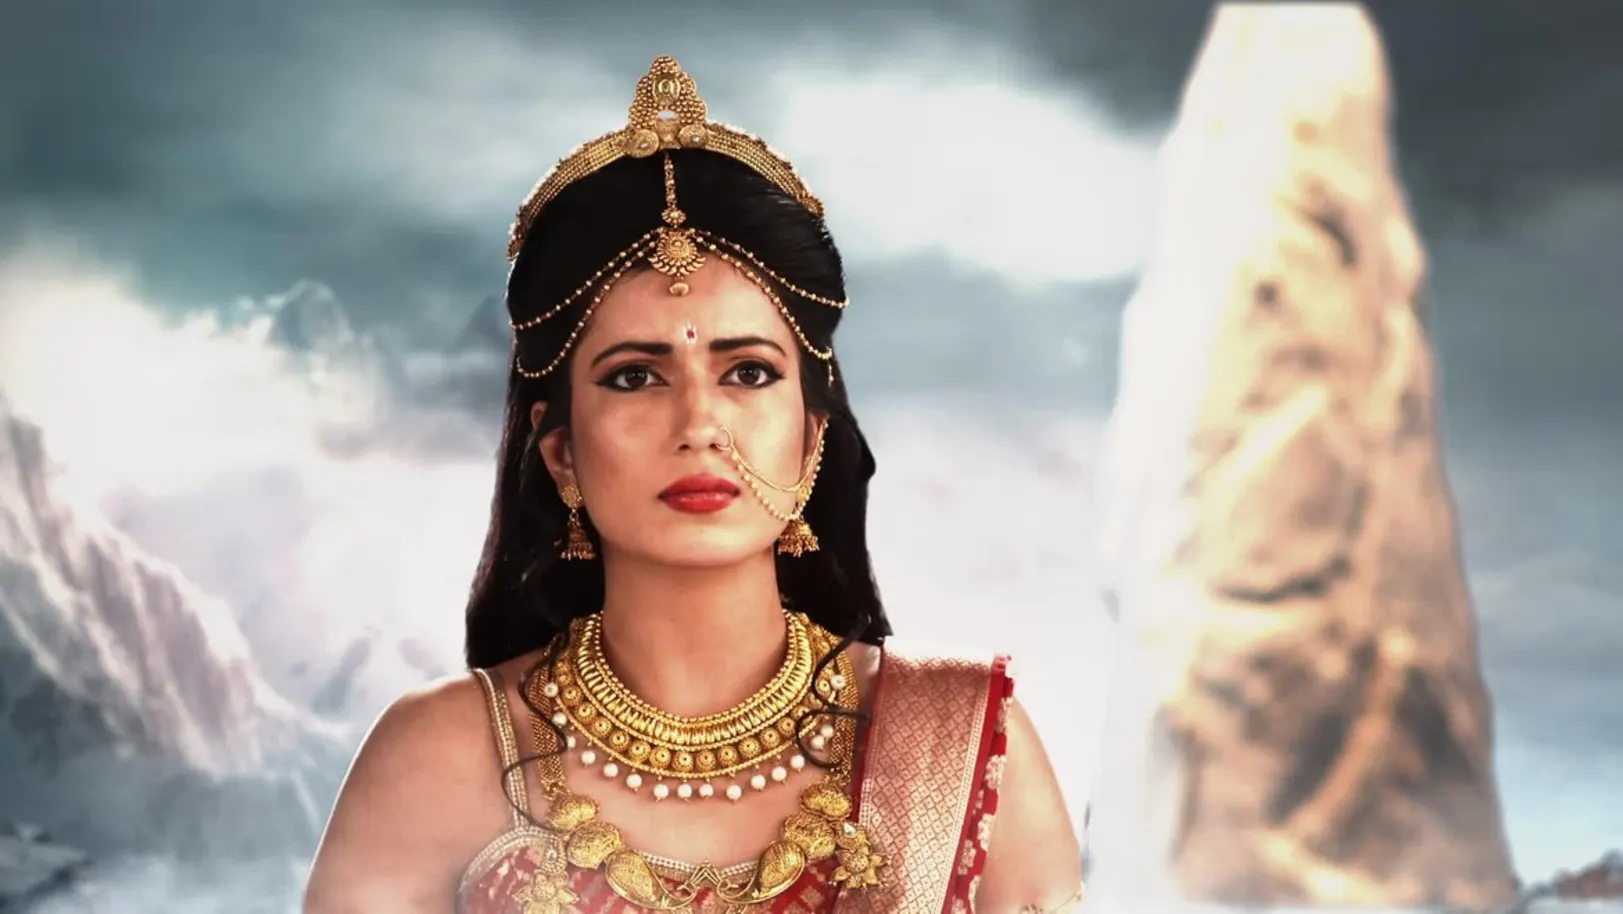 Vikram Betaal - (Hindi) - March 15, 2019 - Webisode - And TV 15th March 2019 Webisode